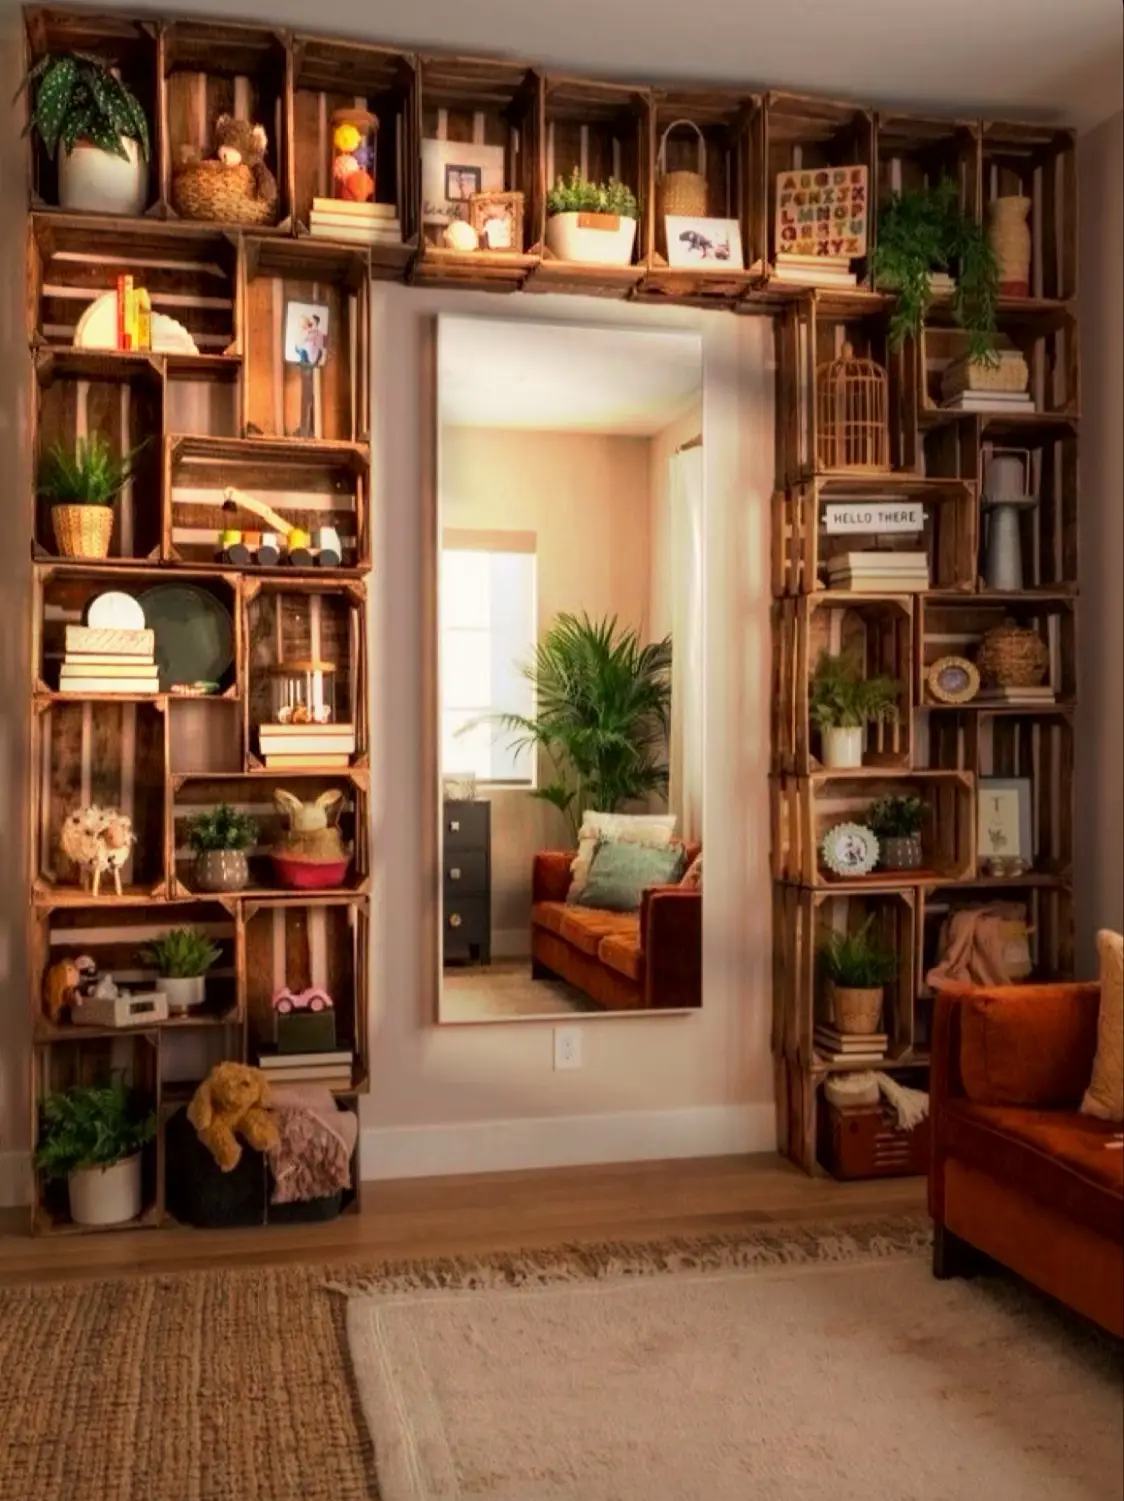 Bookish Decor in my Loft that Just Makes Sense, Gallery posted by Ashley